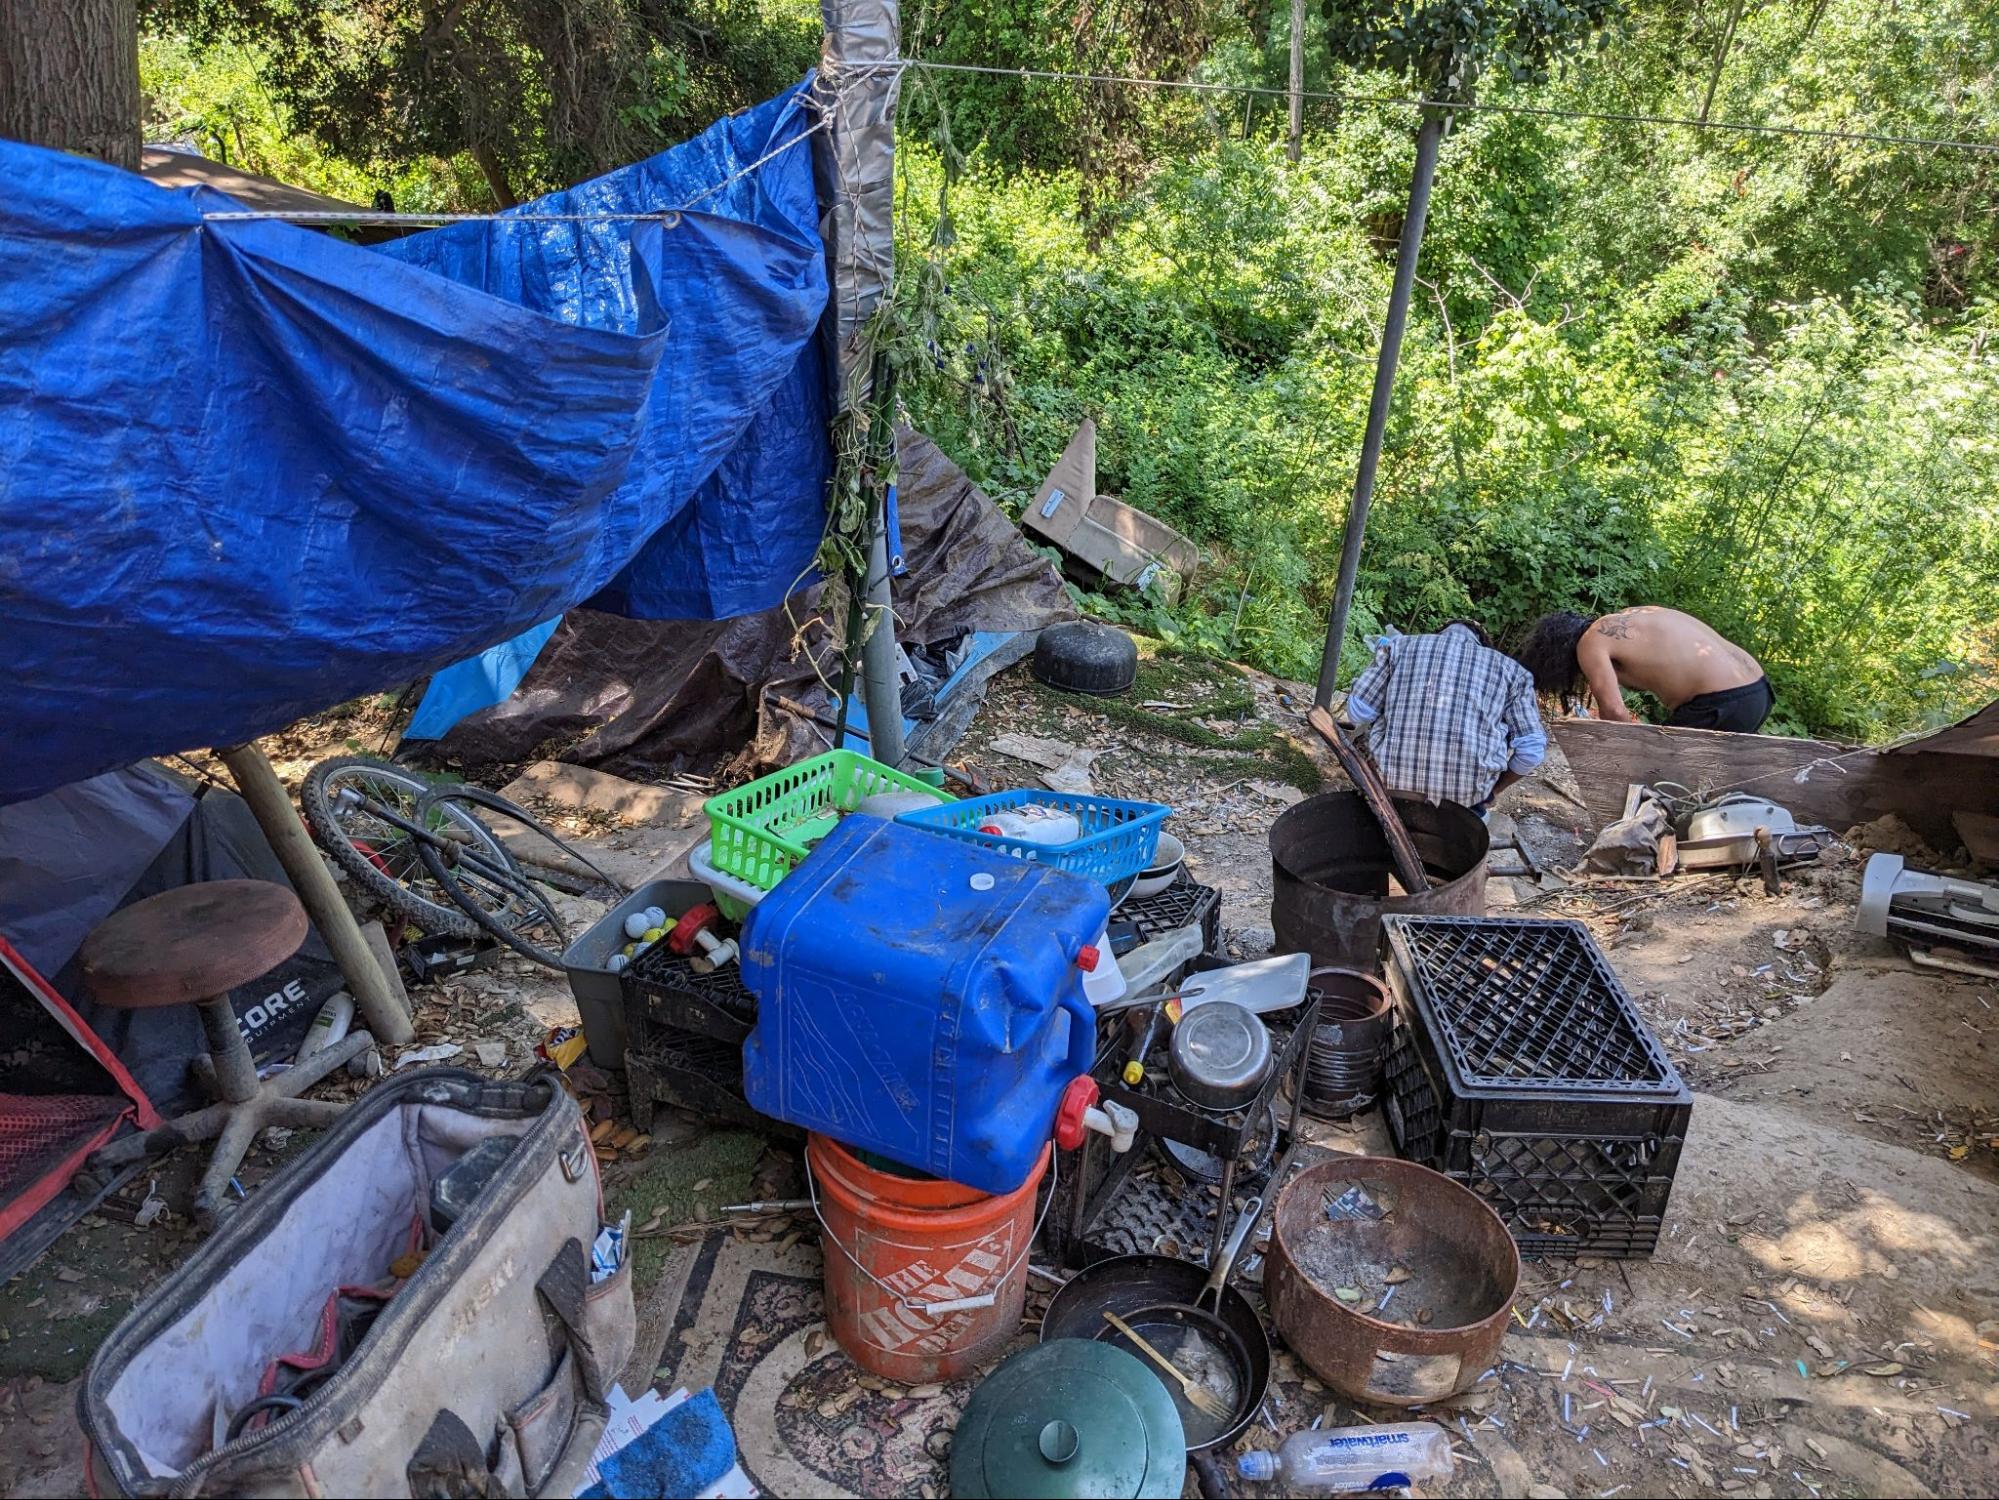 Two people look toward green bushes at a homeless encampment covered by a blue tarp, with items scattered on the ground